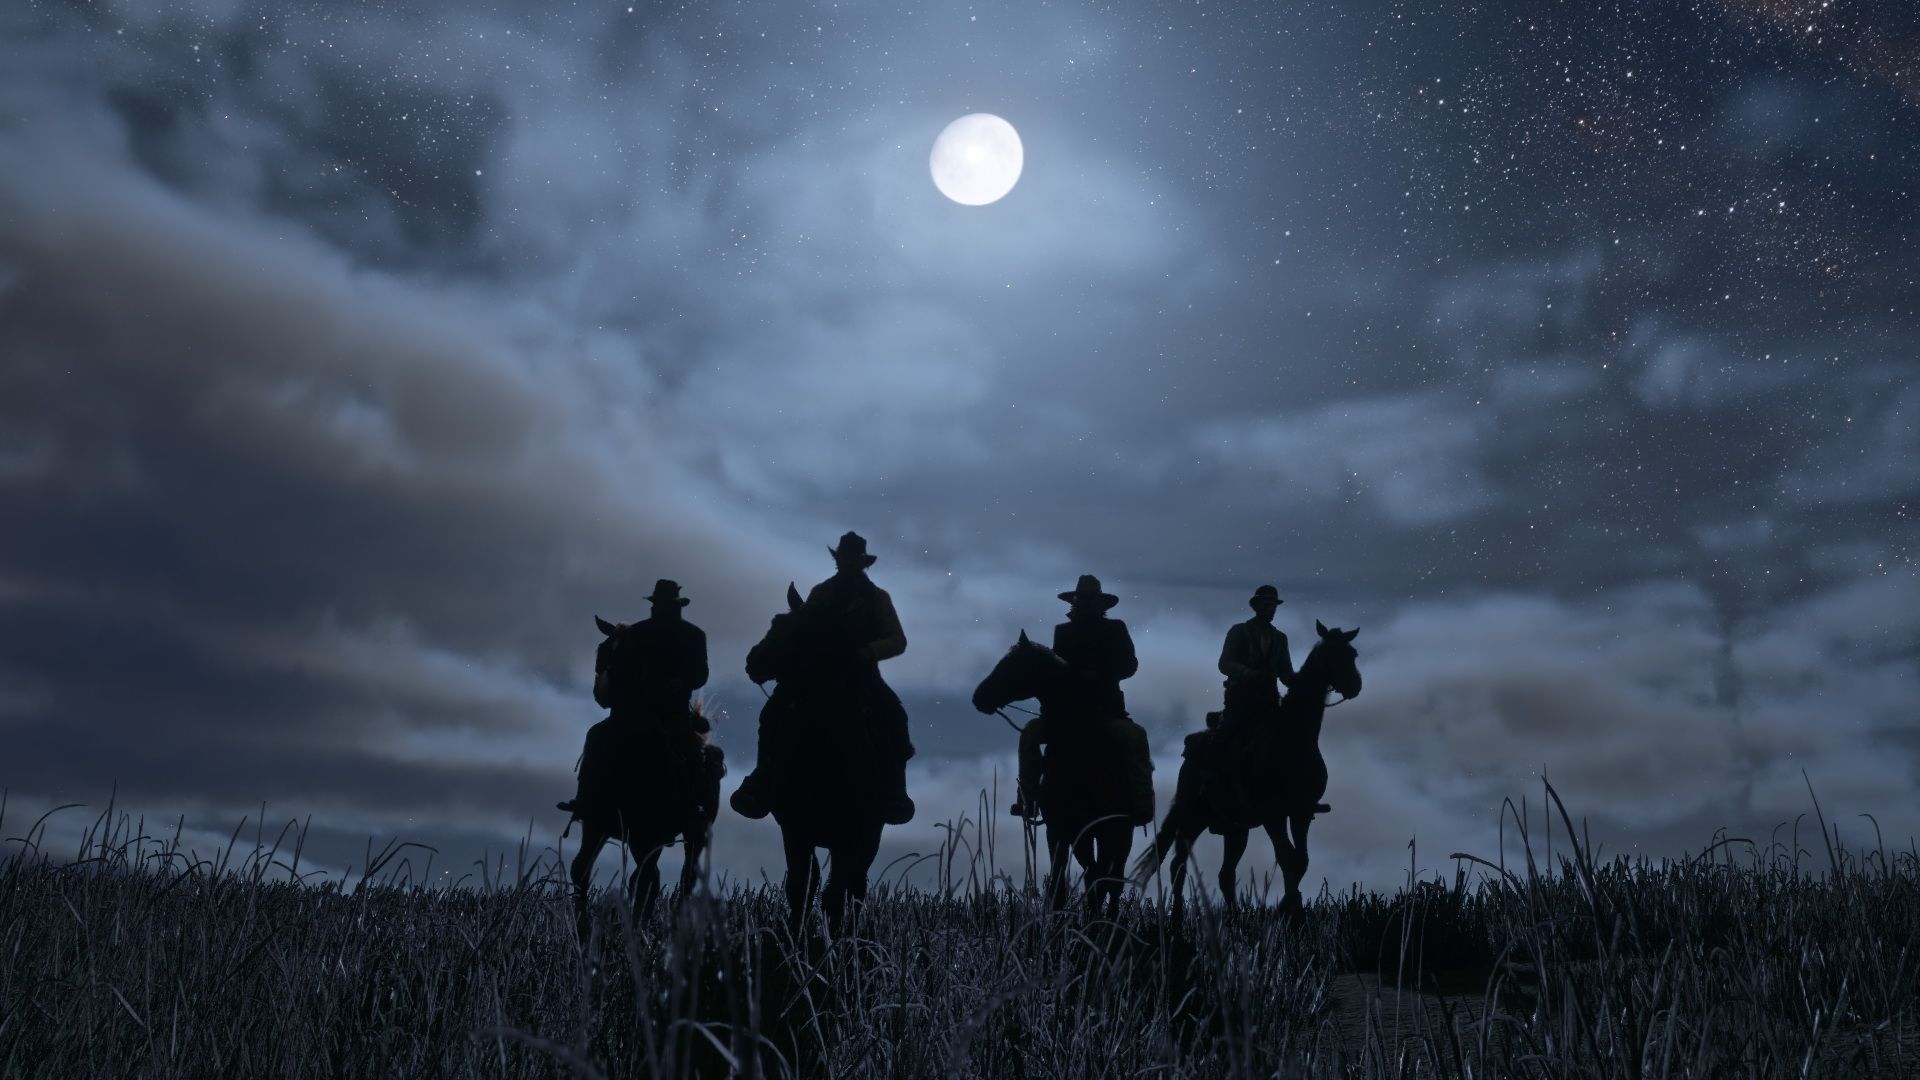 red dead online release schedule when time start thursday friday